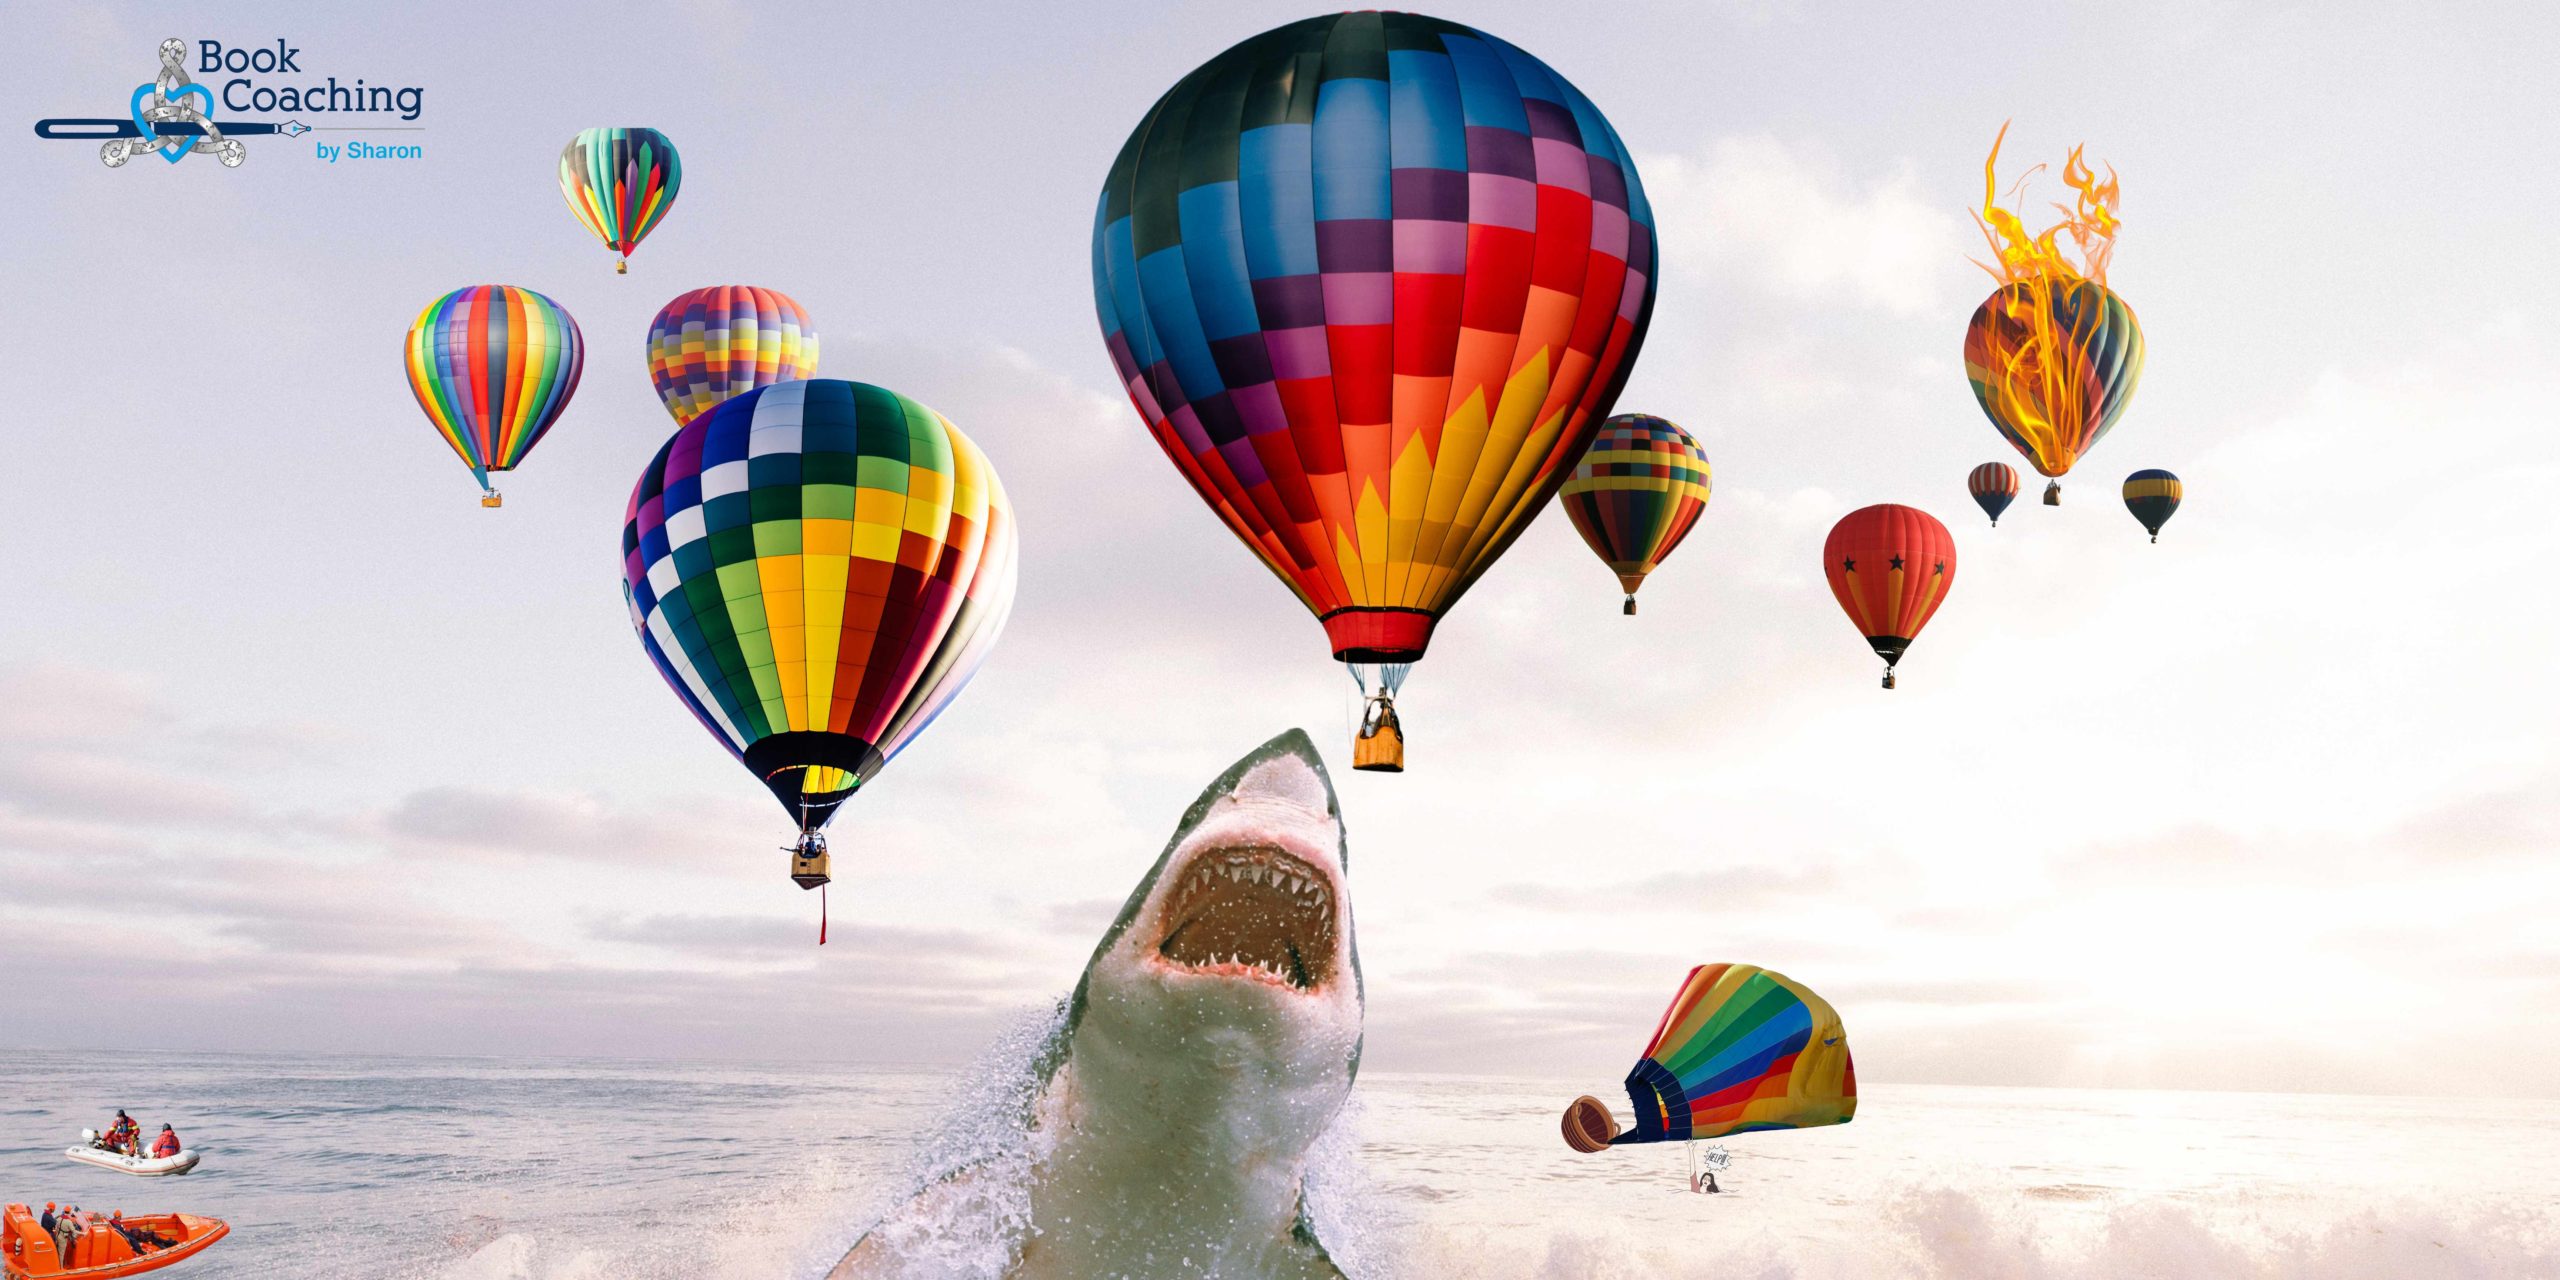 Image created in Canva shows hot air balloons in various forms of distress including collapsing in the water, being attacked by a giant shark etc., with rescue boats arriving, to depict Challenges, Threats and Near-Misses